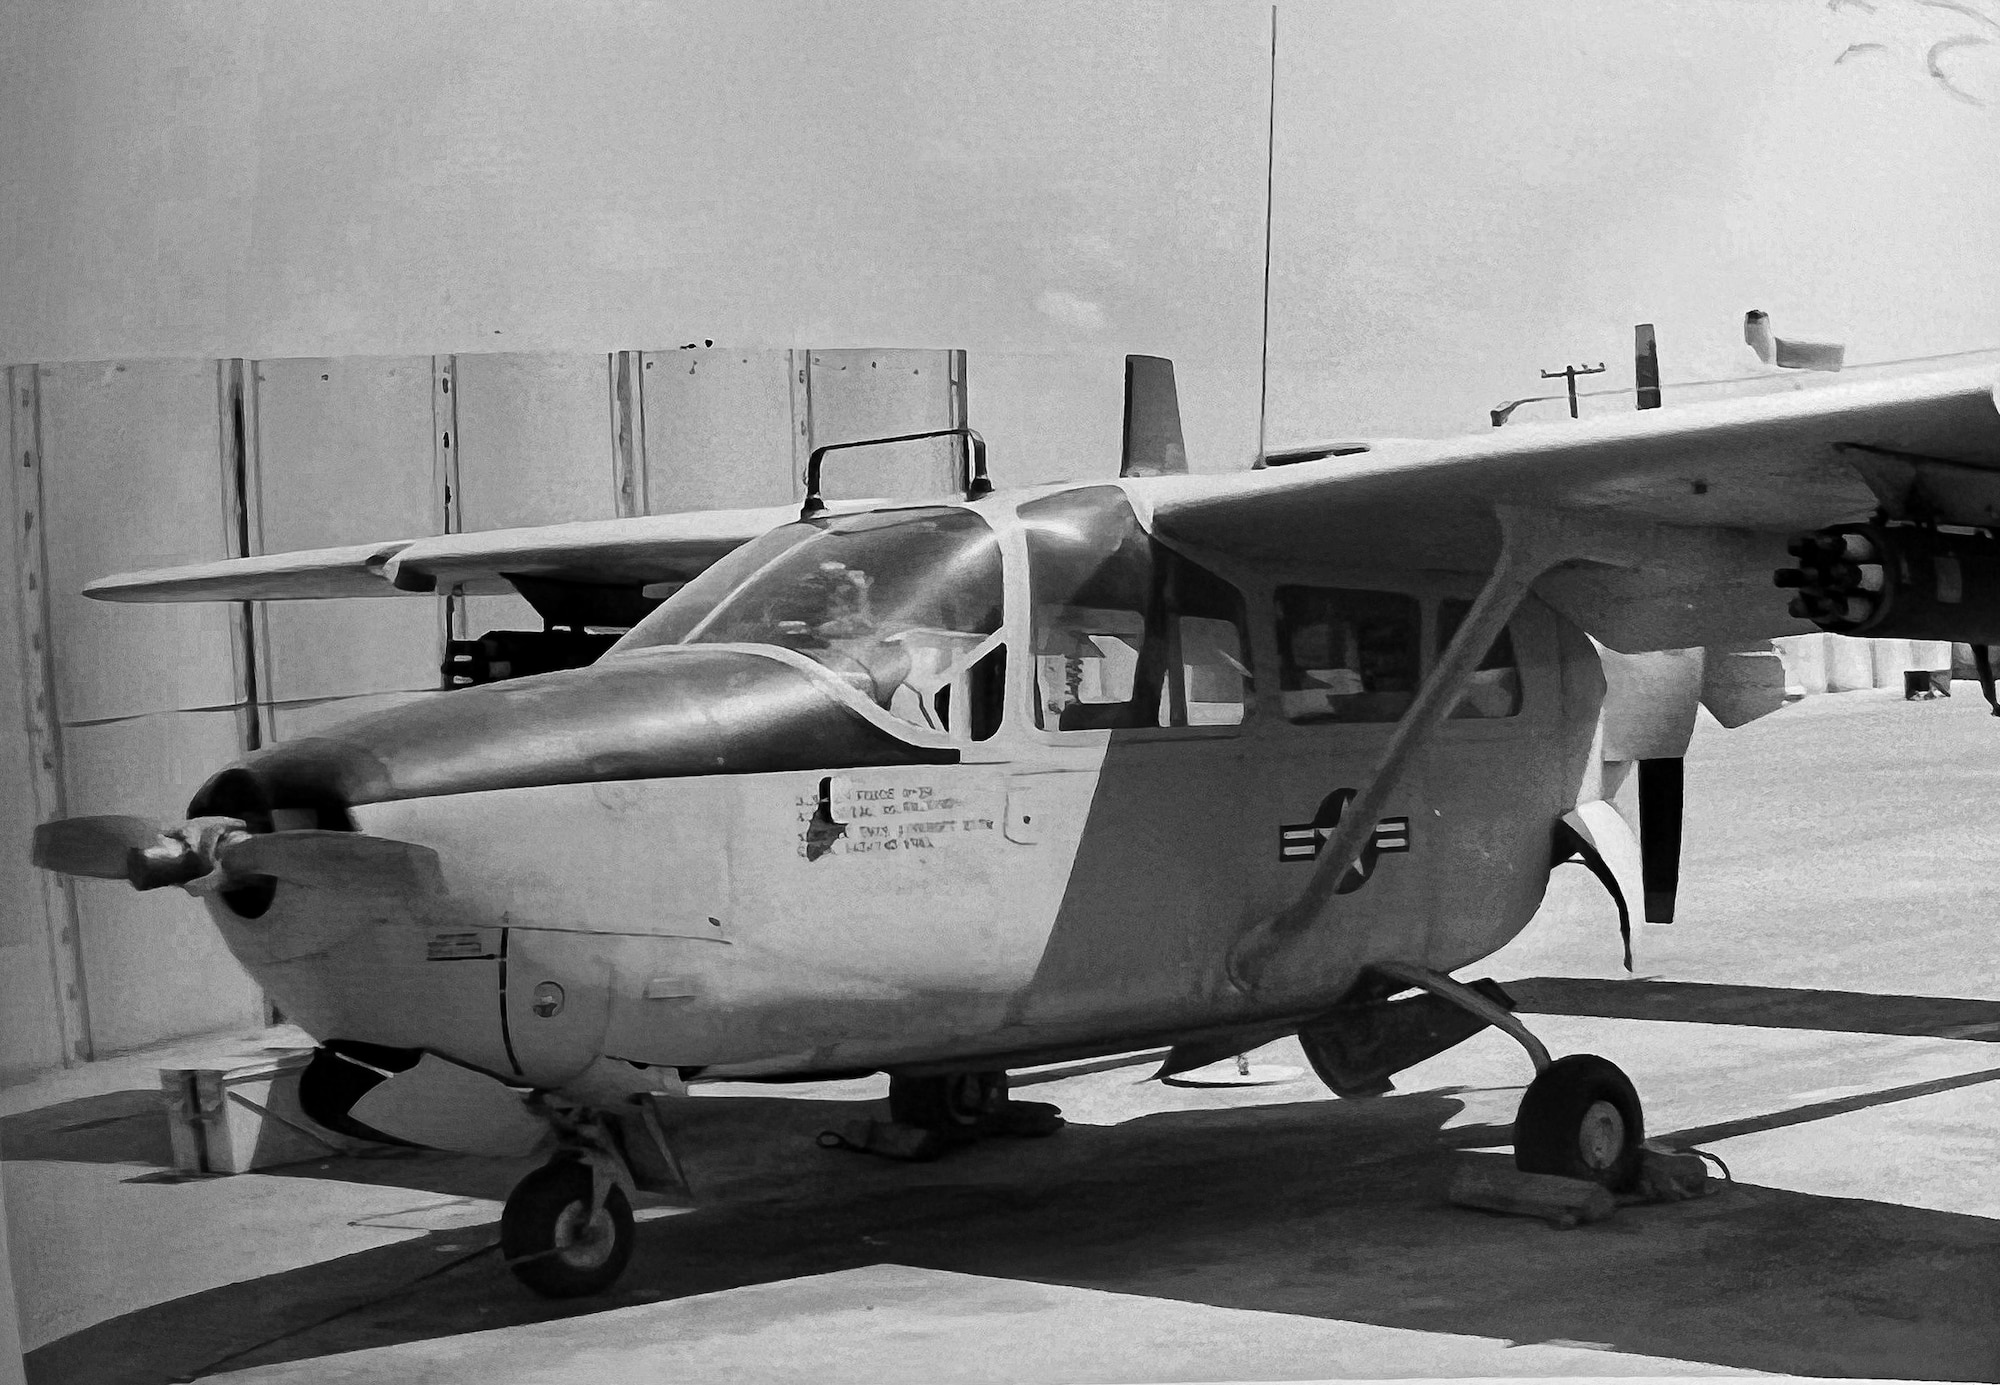 A U.S. Air Force O-2 Skymaster, flown by retired Brig. Gen. Kenneth J. Stromqist, is parked at the 19th Tactical Air Support Squadron (TASS) on Tan Son Nhut Airbase, III Corps, South Vietnam in 1970.